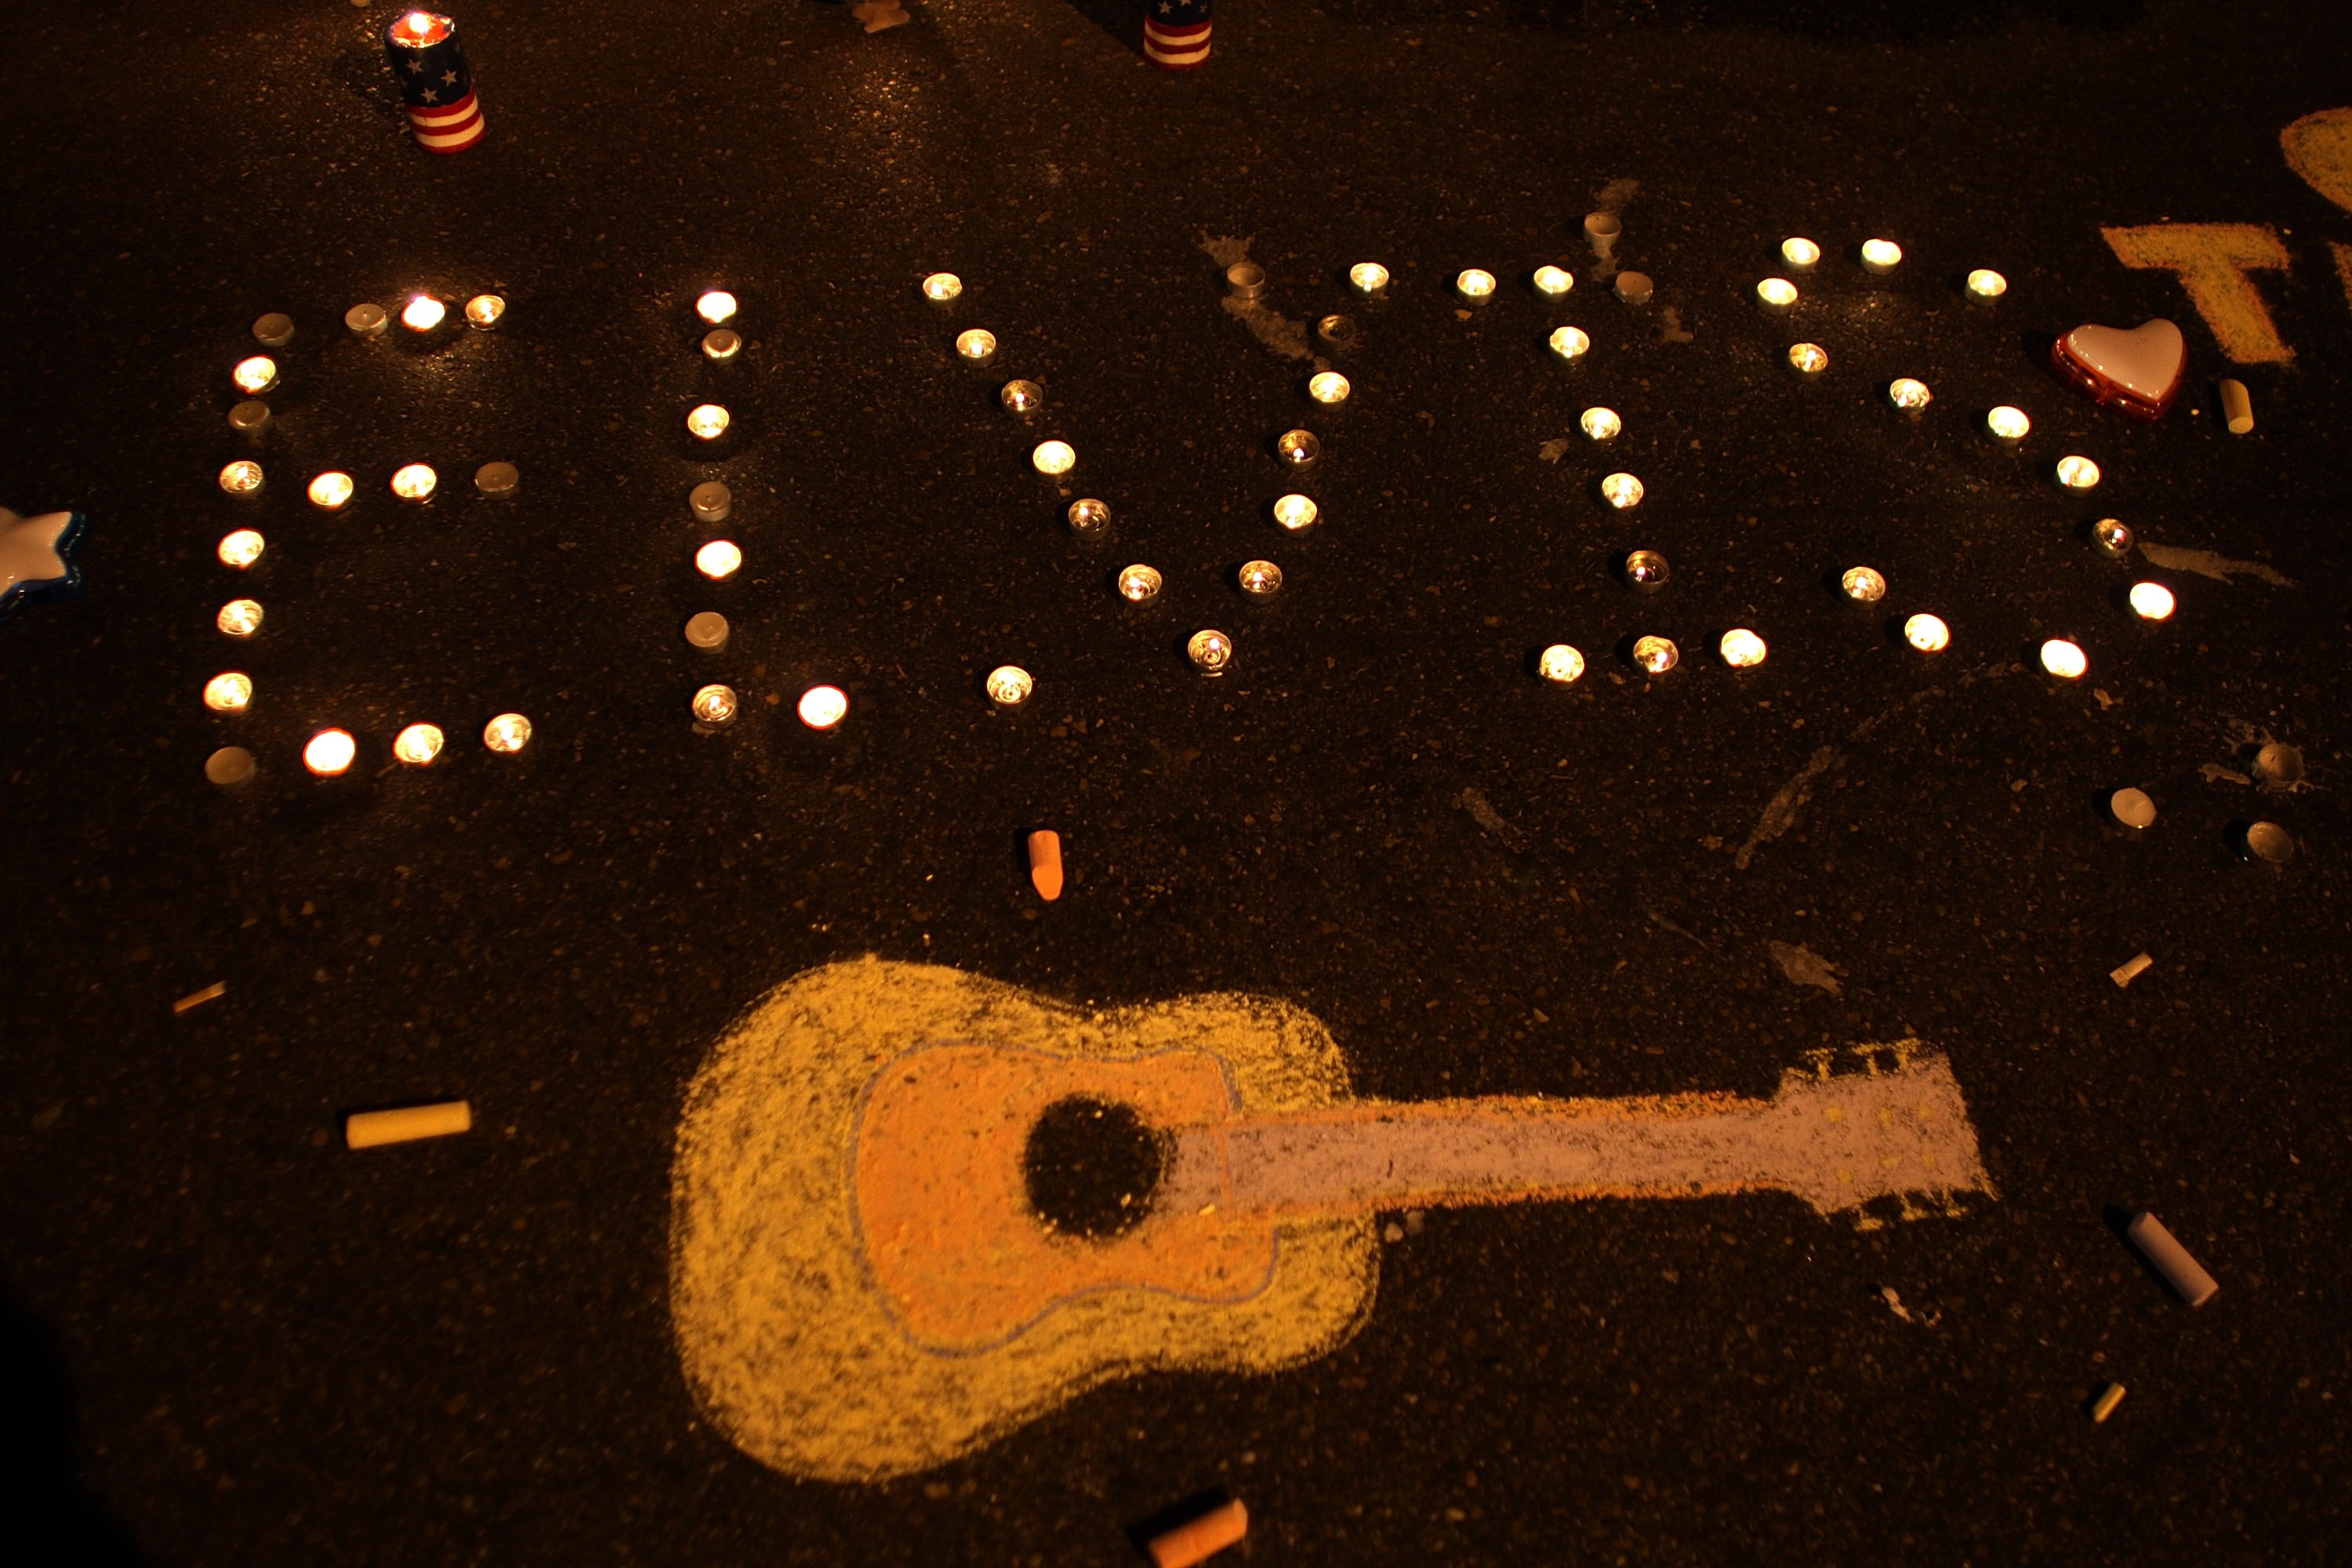 An arrangement of candles spelling out "Elvis" beside a chalk depiction of a guitar during the 30th anniversary of Elvis Presley's death in Graceland on August 15, 2007 | Source: Getty Images